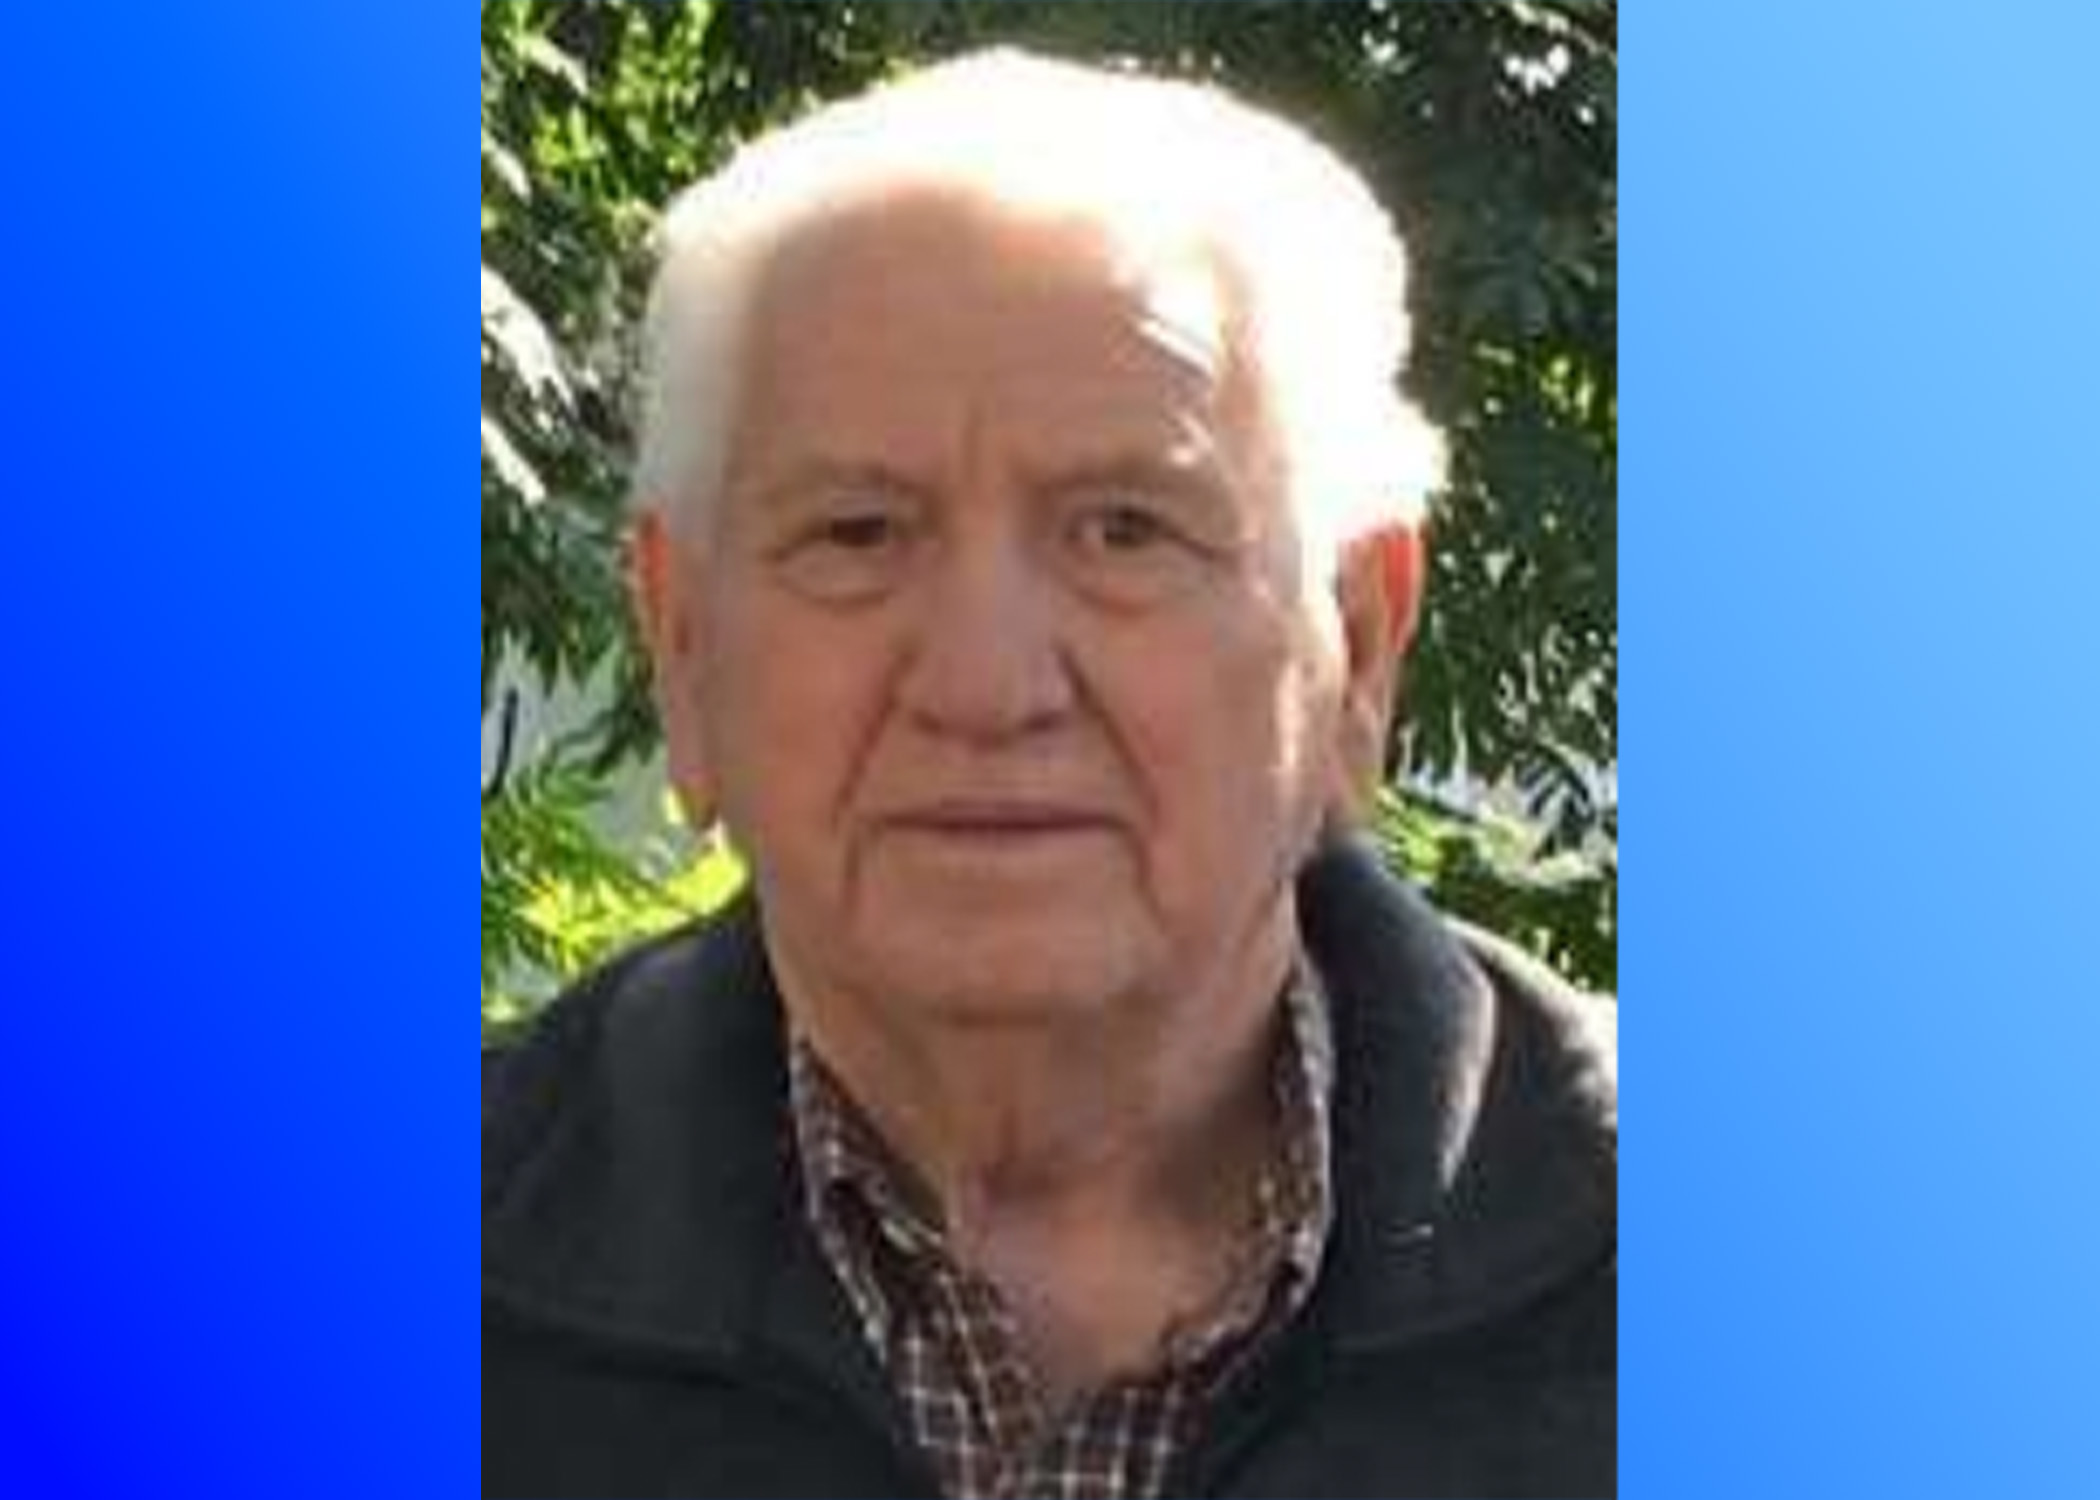 CANCELED: Bessemer PD seeks assistance locating missing 83-year-old man